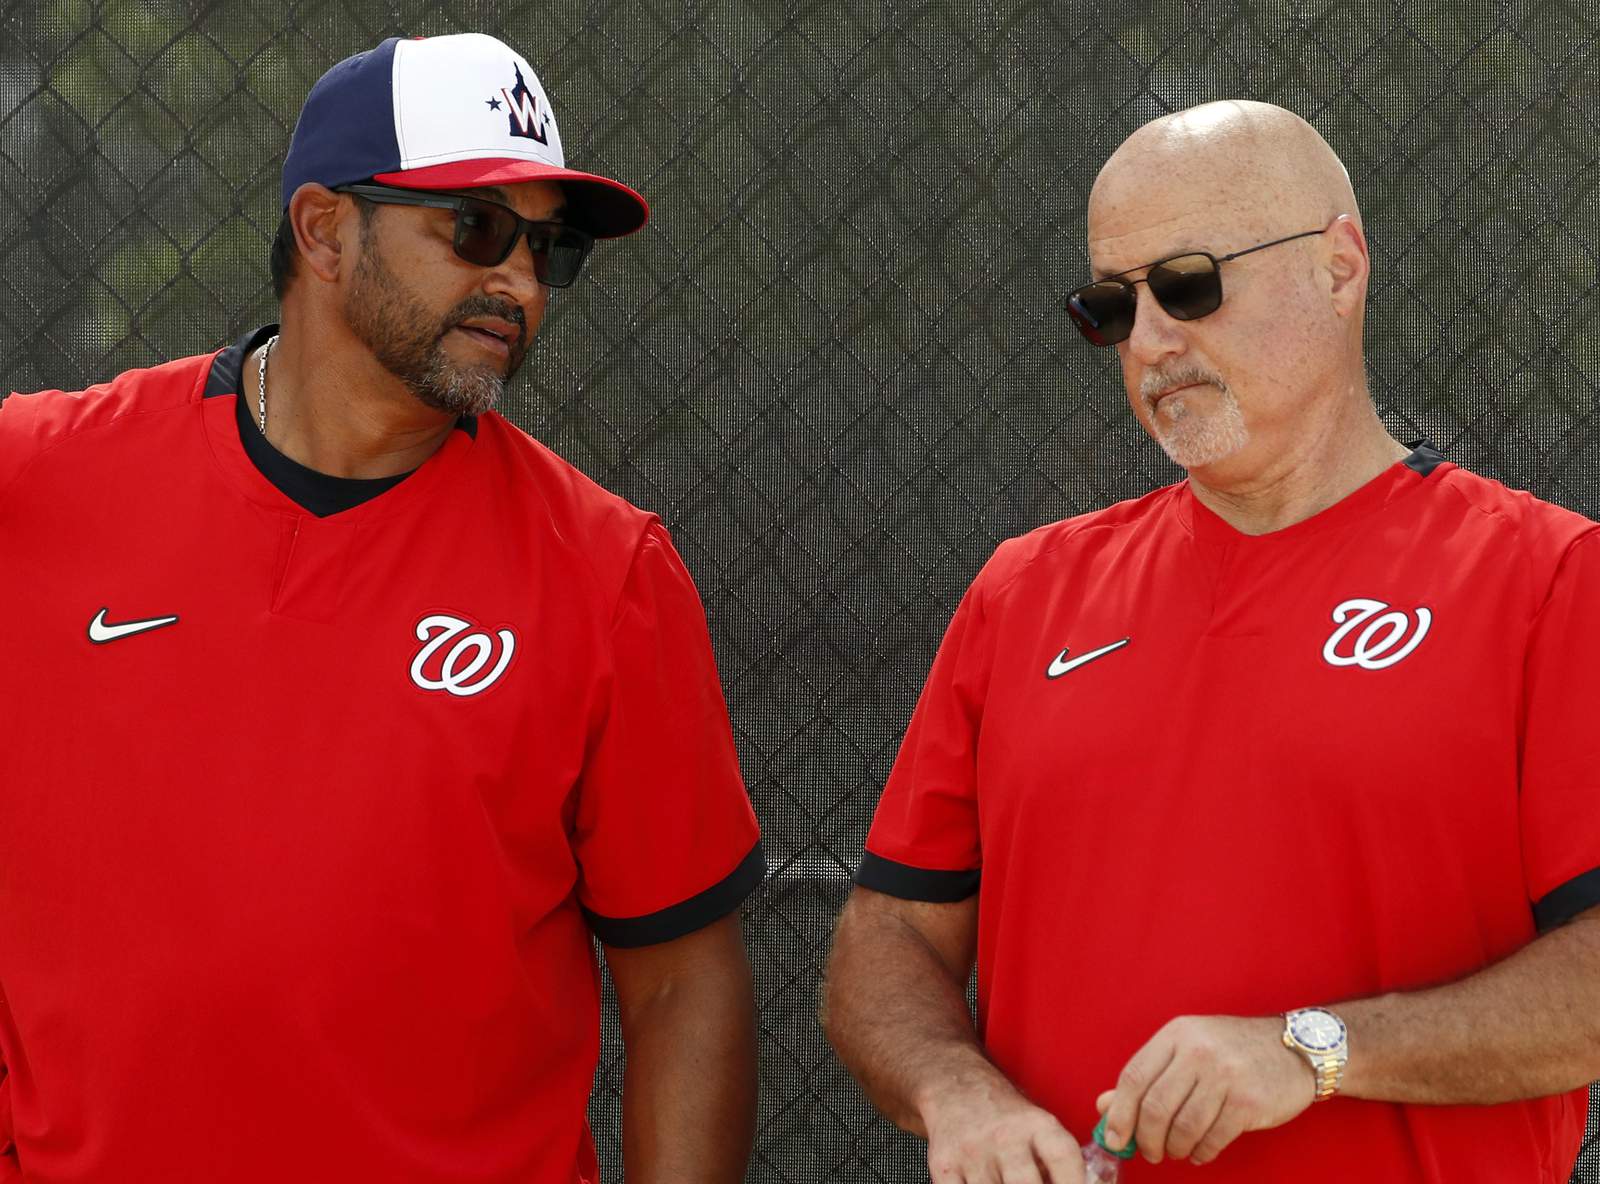 Nats GM Rizzo won't reveal length of Martinez's new contract